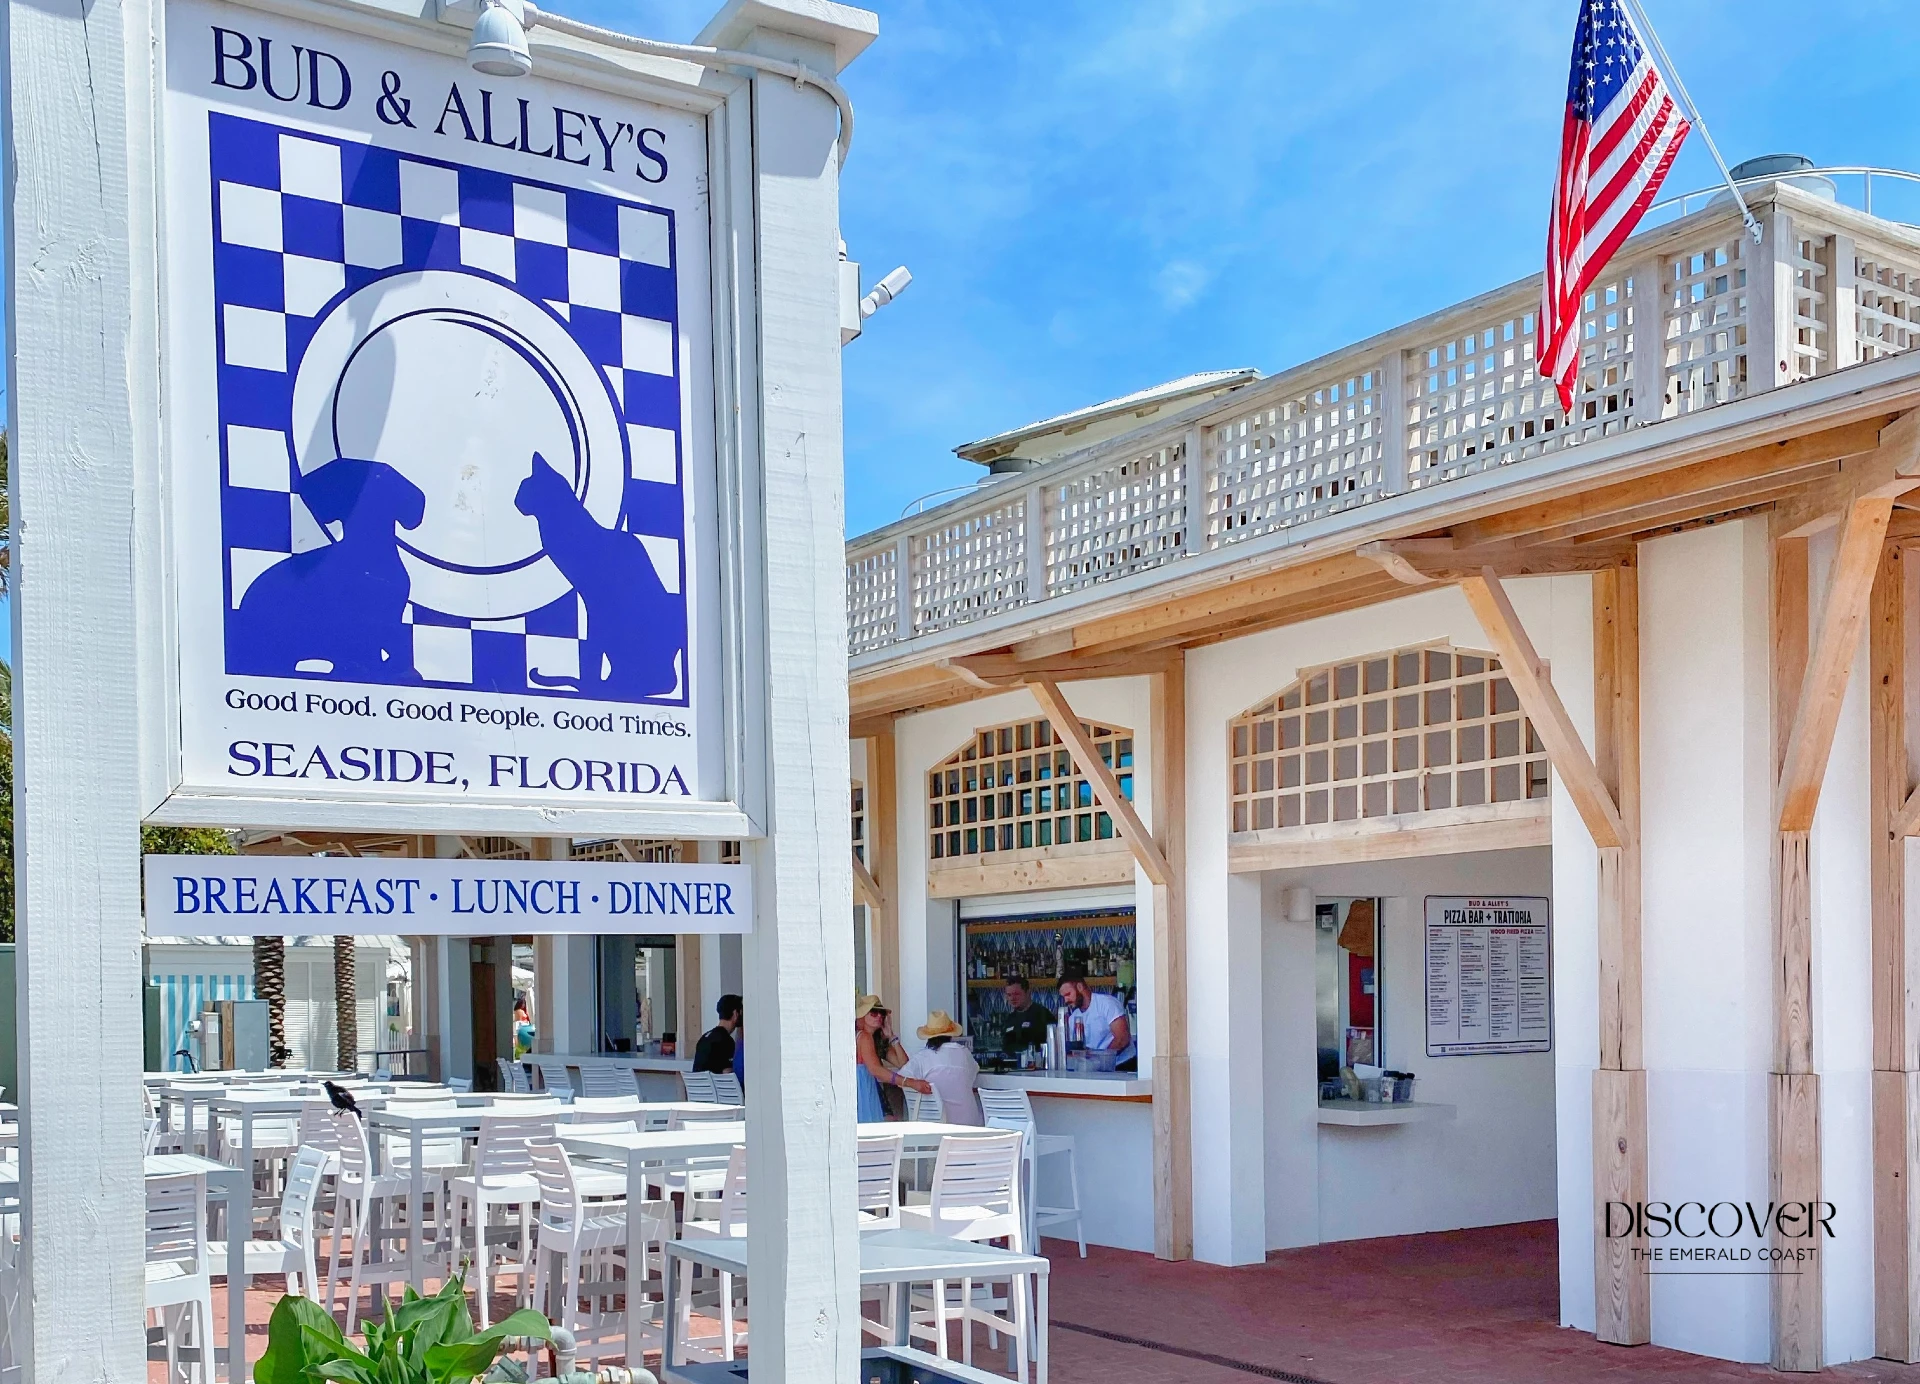 Bud and Alley's in Seaside, FL